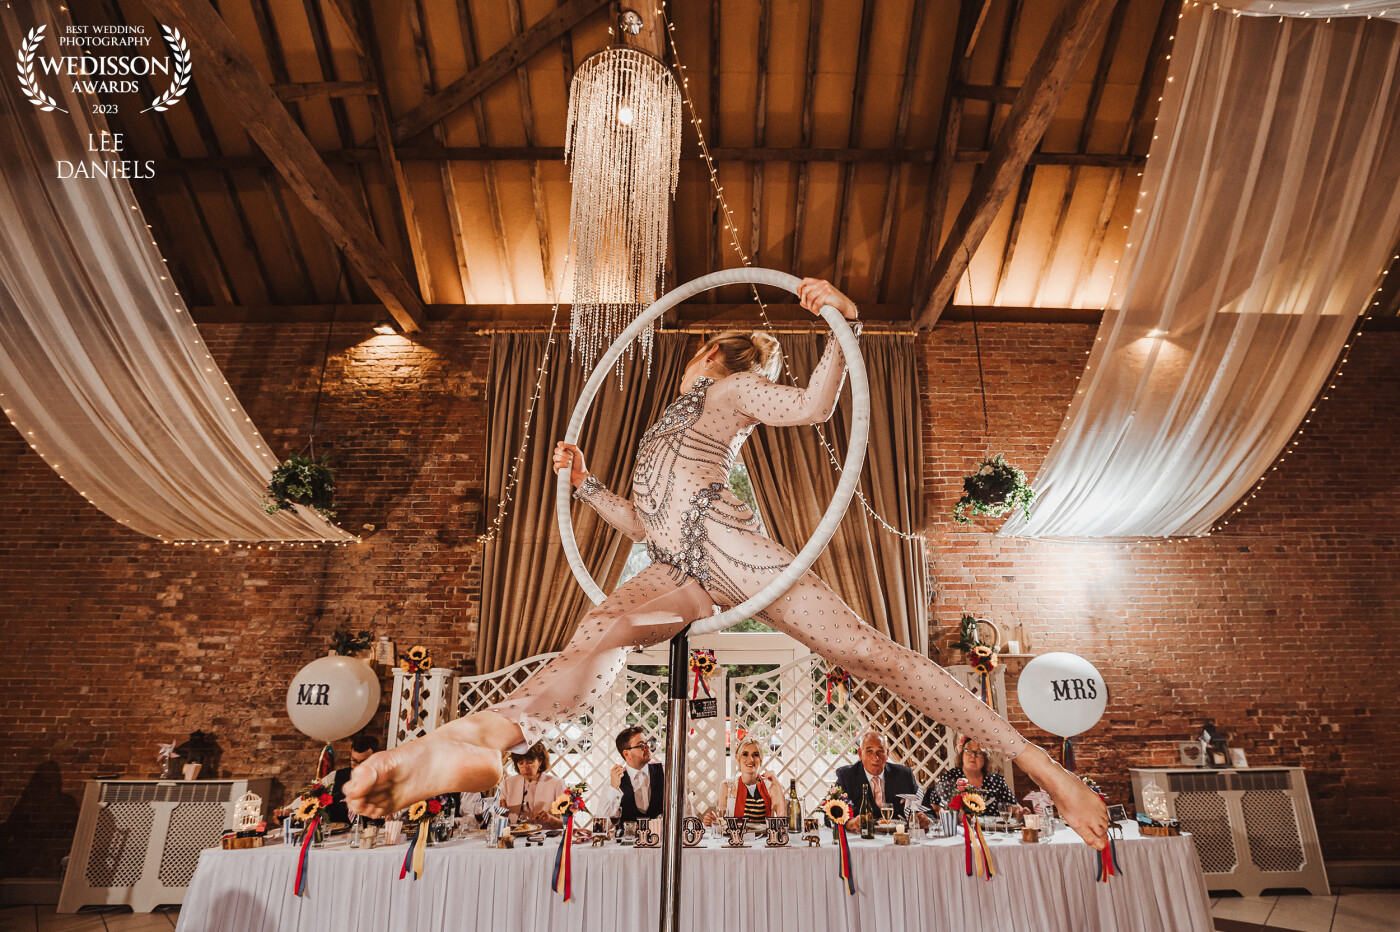 Shannon & Ollie had something special planned for their guest during the wedding breakfast, Elli from contortingcoopz put on a great show, everyone was fixated on her wonderful performance <br />
<br />
Venue - Elsham Hall